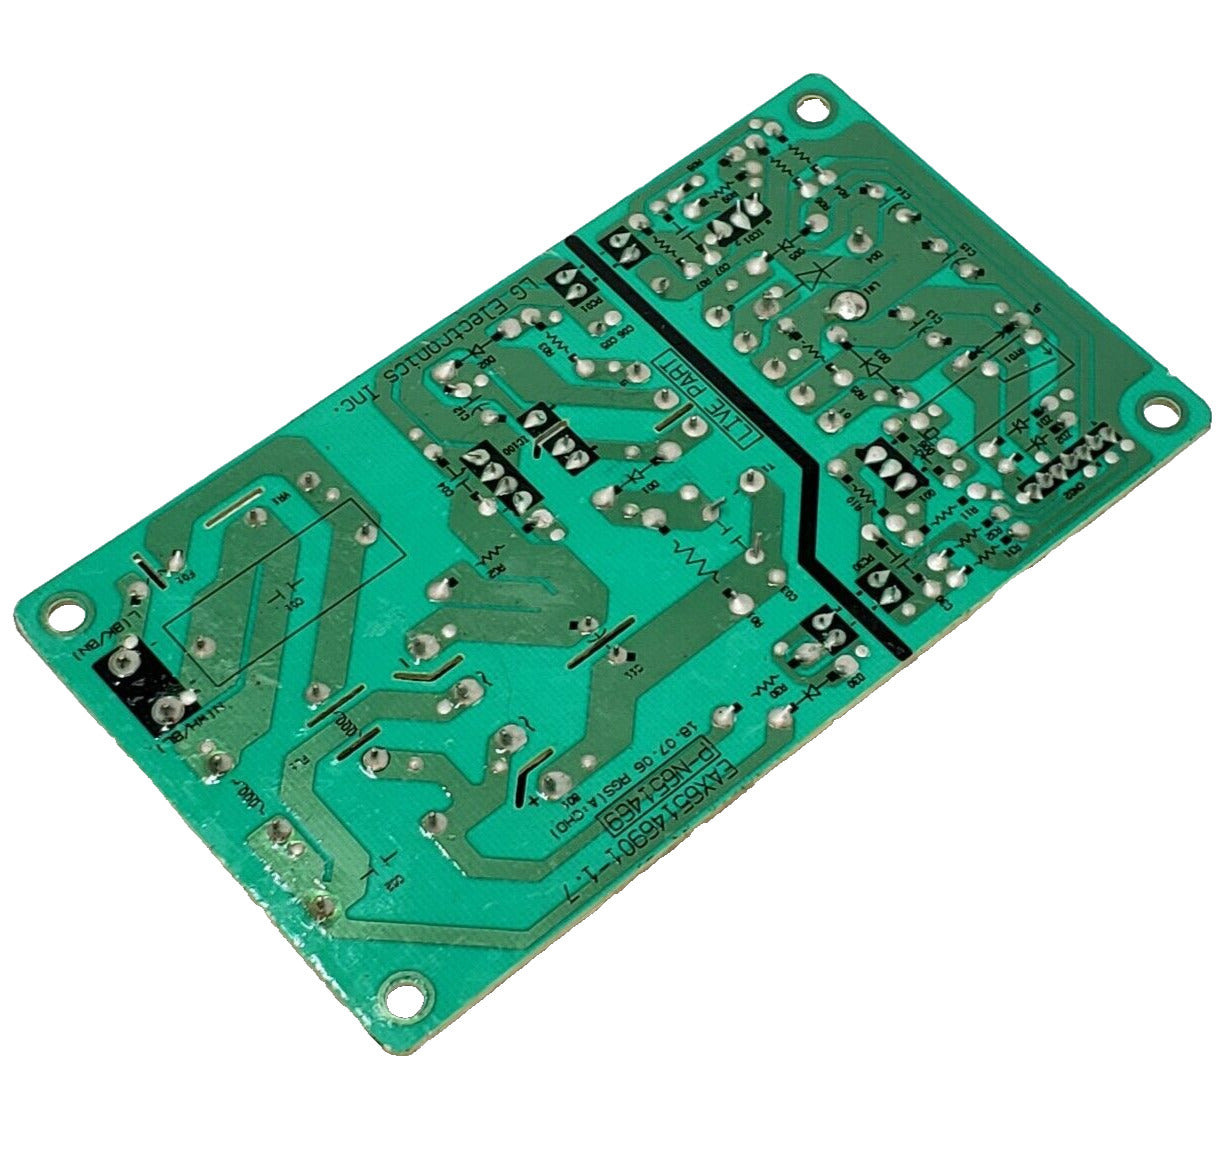 Genuine OEM Replacement for LG Oven Power Board EBR80595701